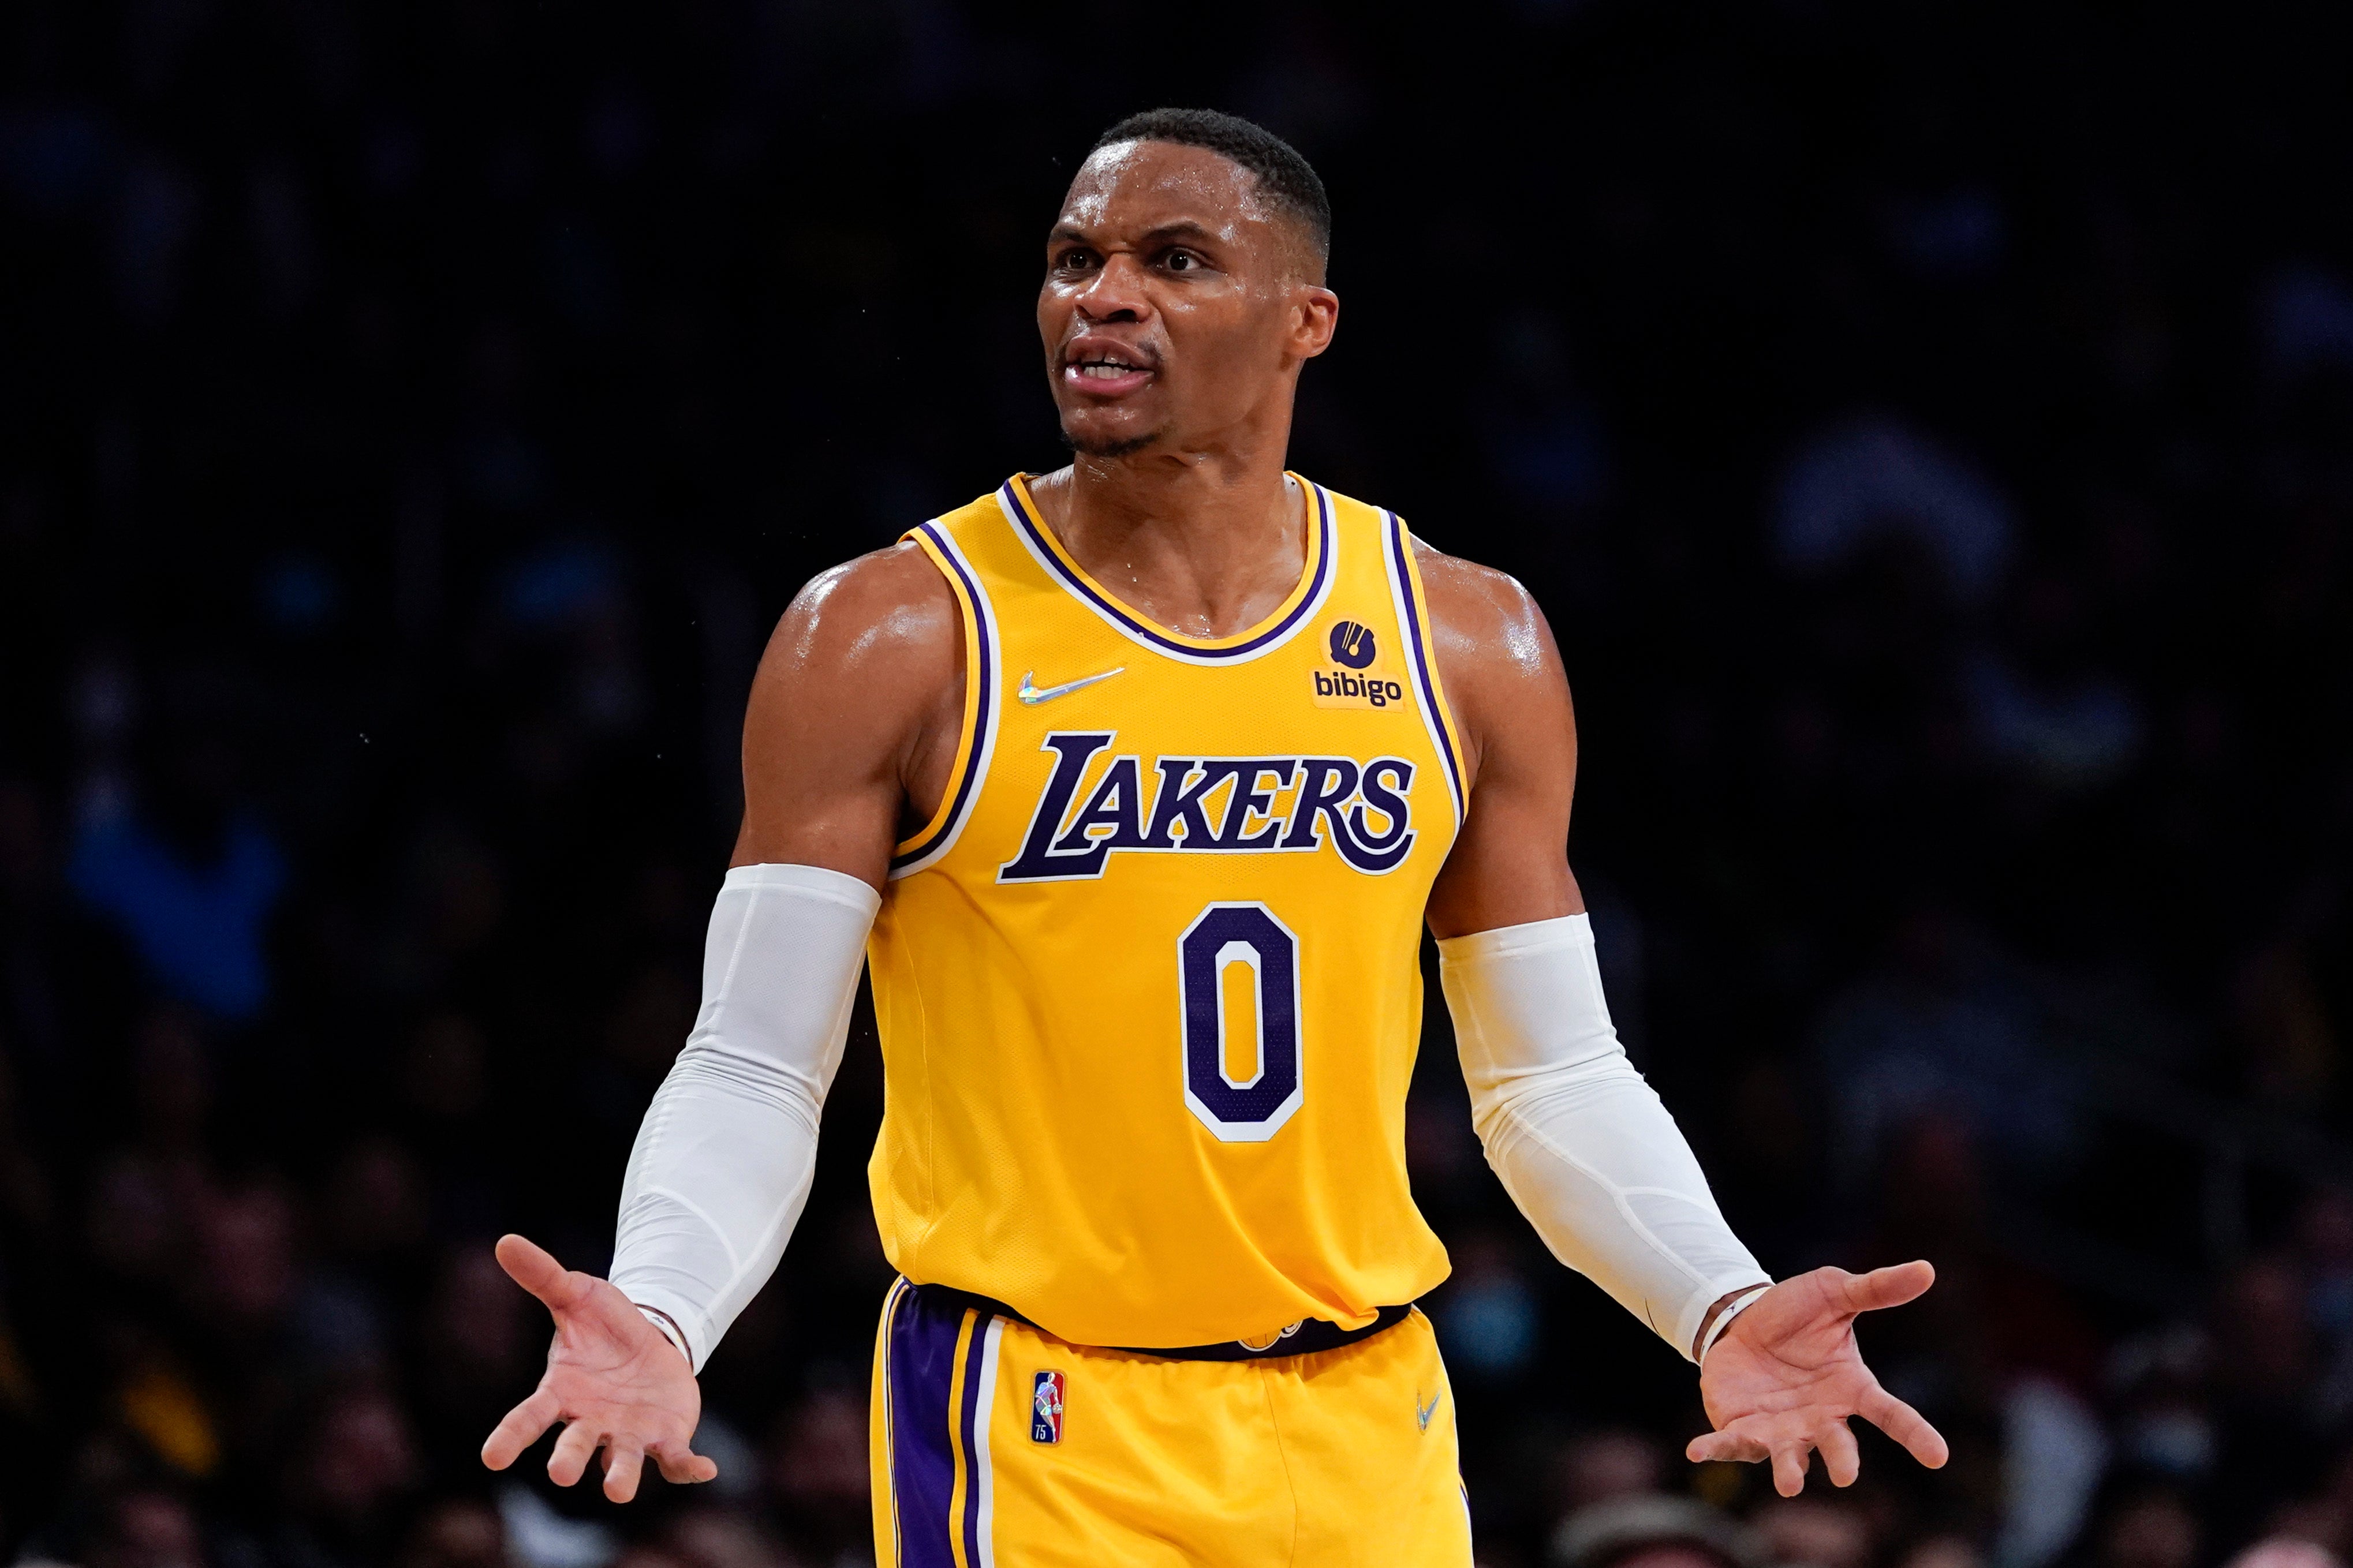 NBA: The follow that has blown up the NBA and links Westbrook to